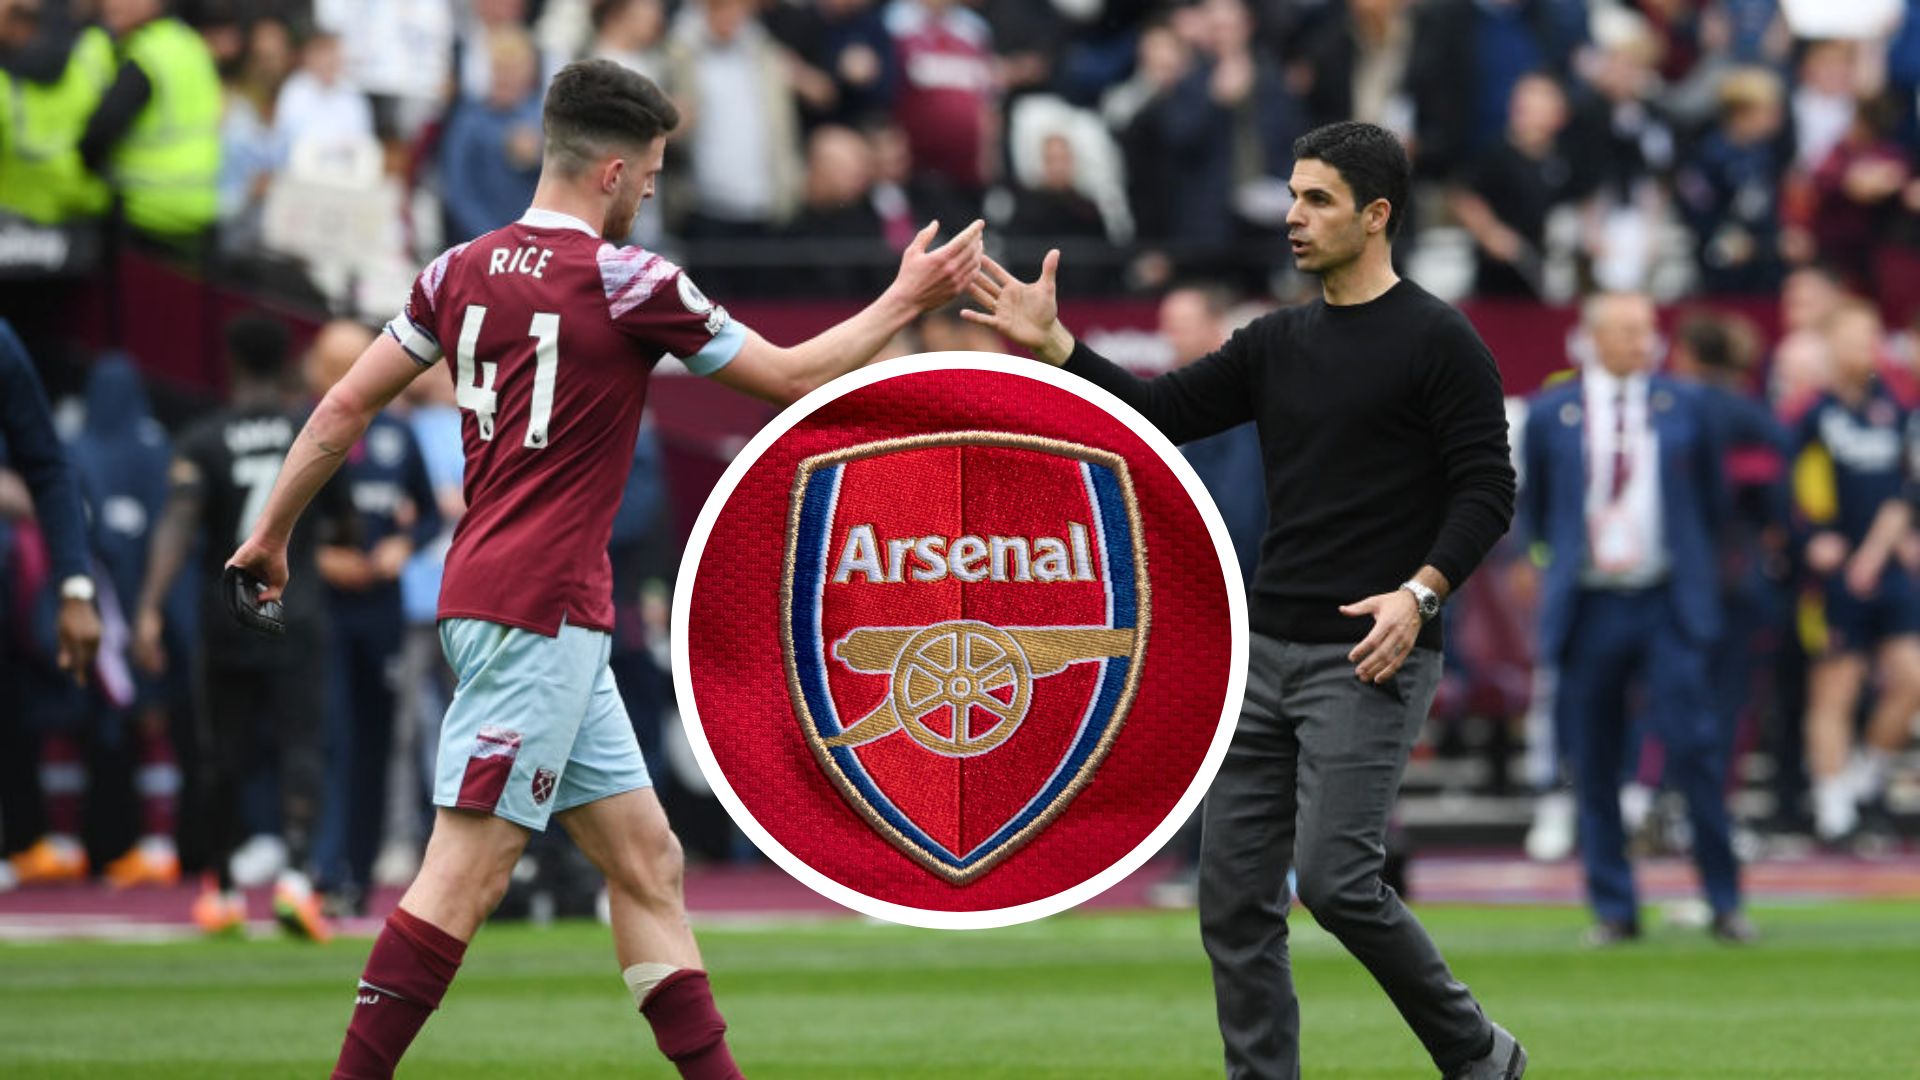 Arsenal face complicated issue in Declan Rice transfer: report